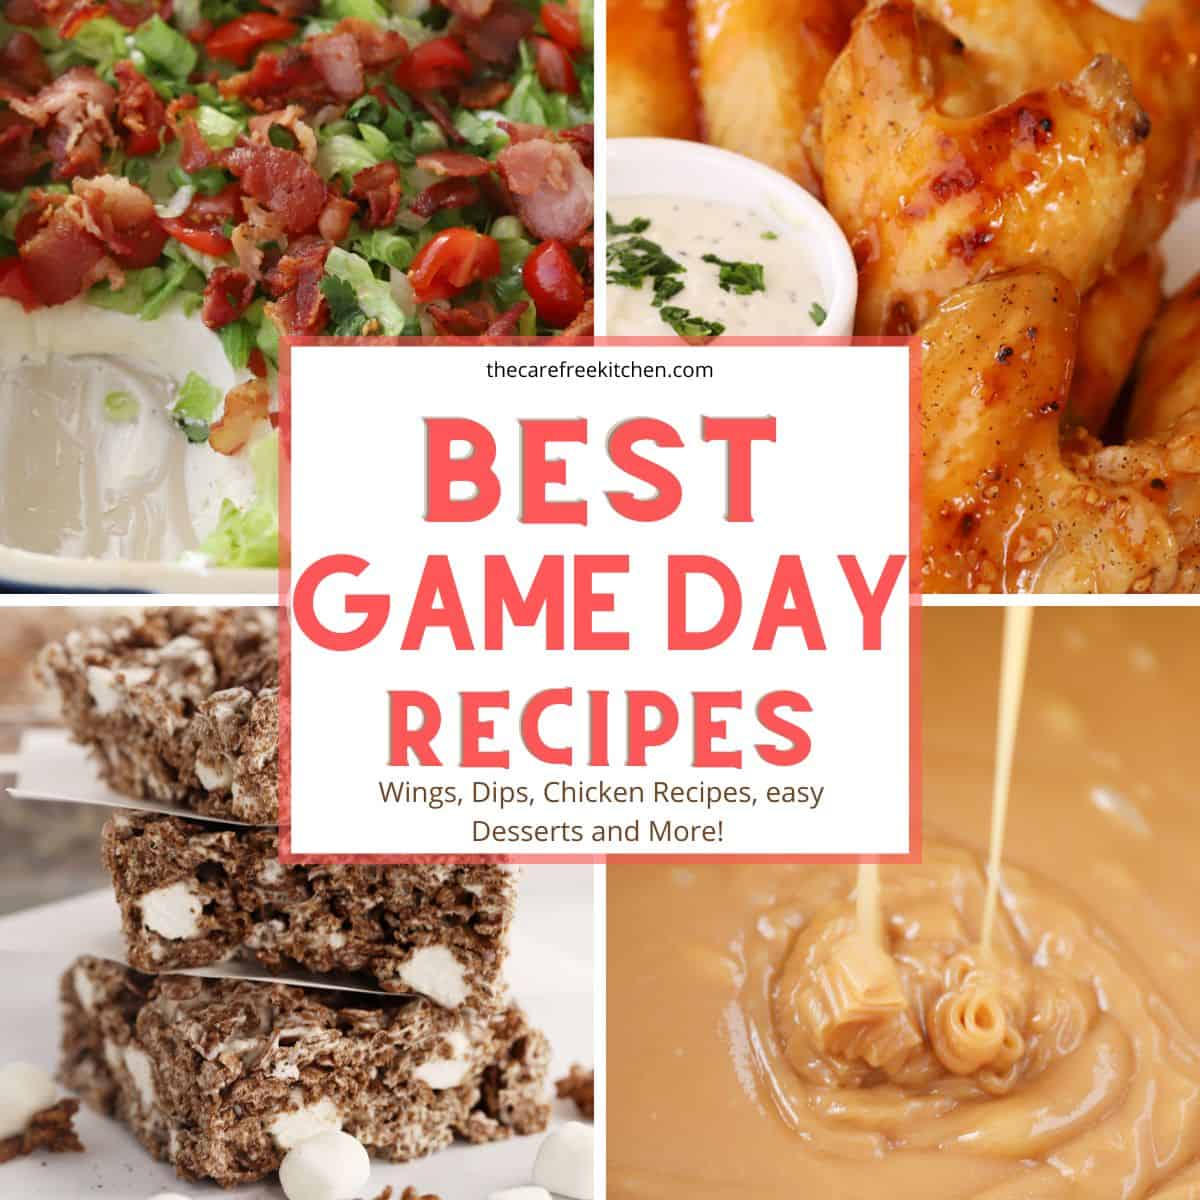 33 of the best game day foods collage- taquitos, cheese ball, dip and potato skins